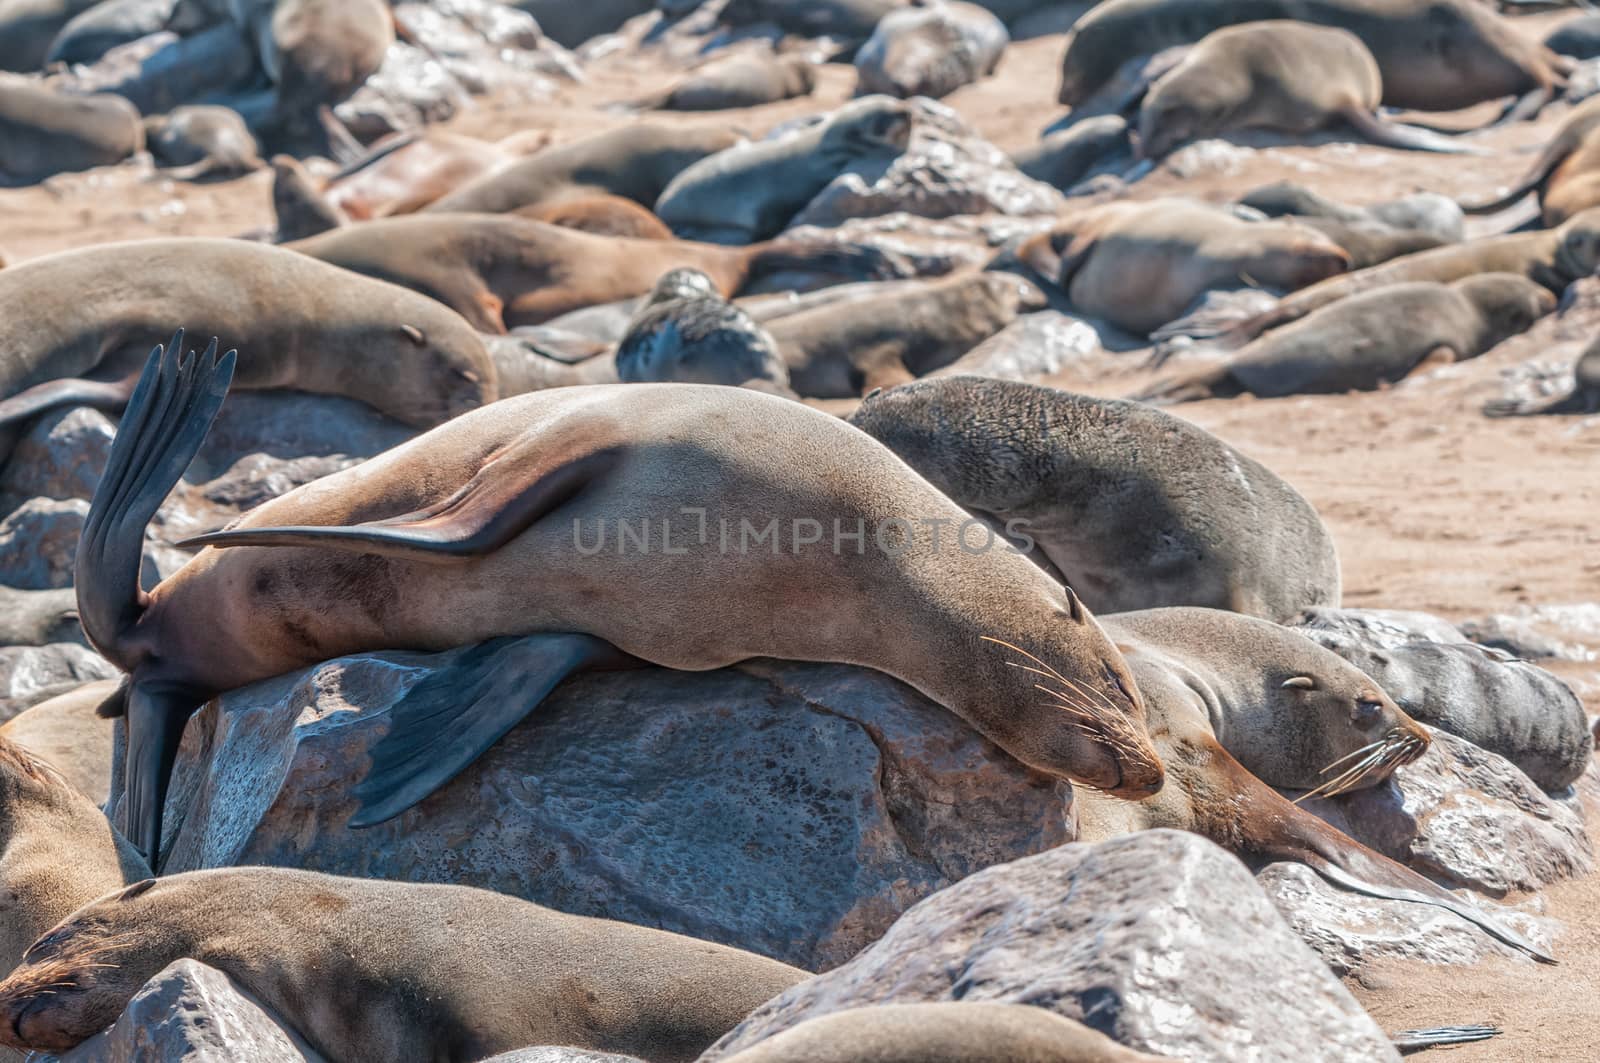 Cape Fur Seals at Cape Cross in Namibia by dpreezg